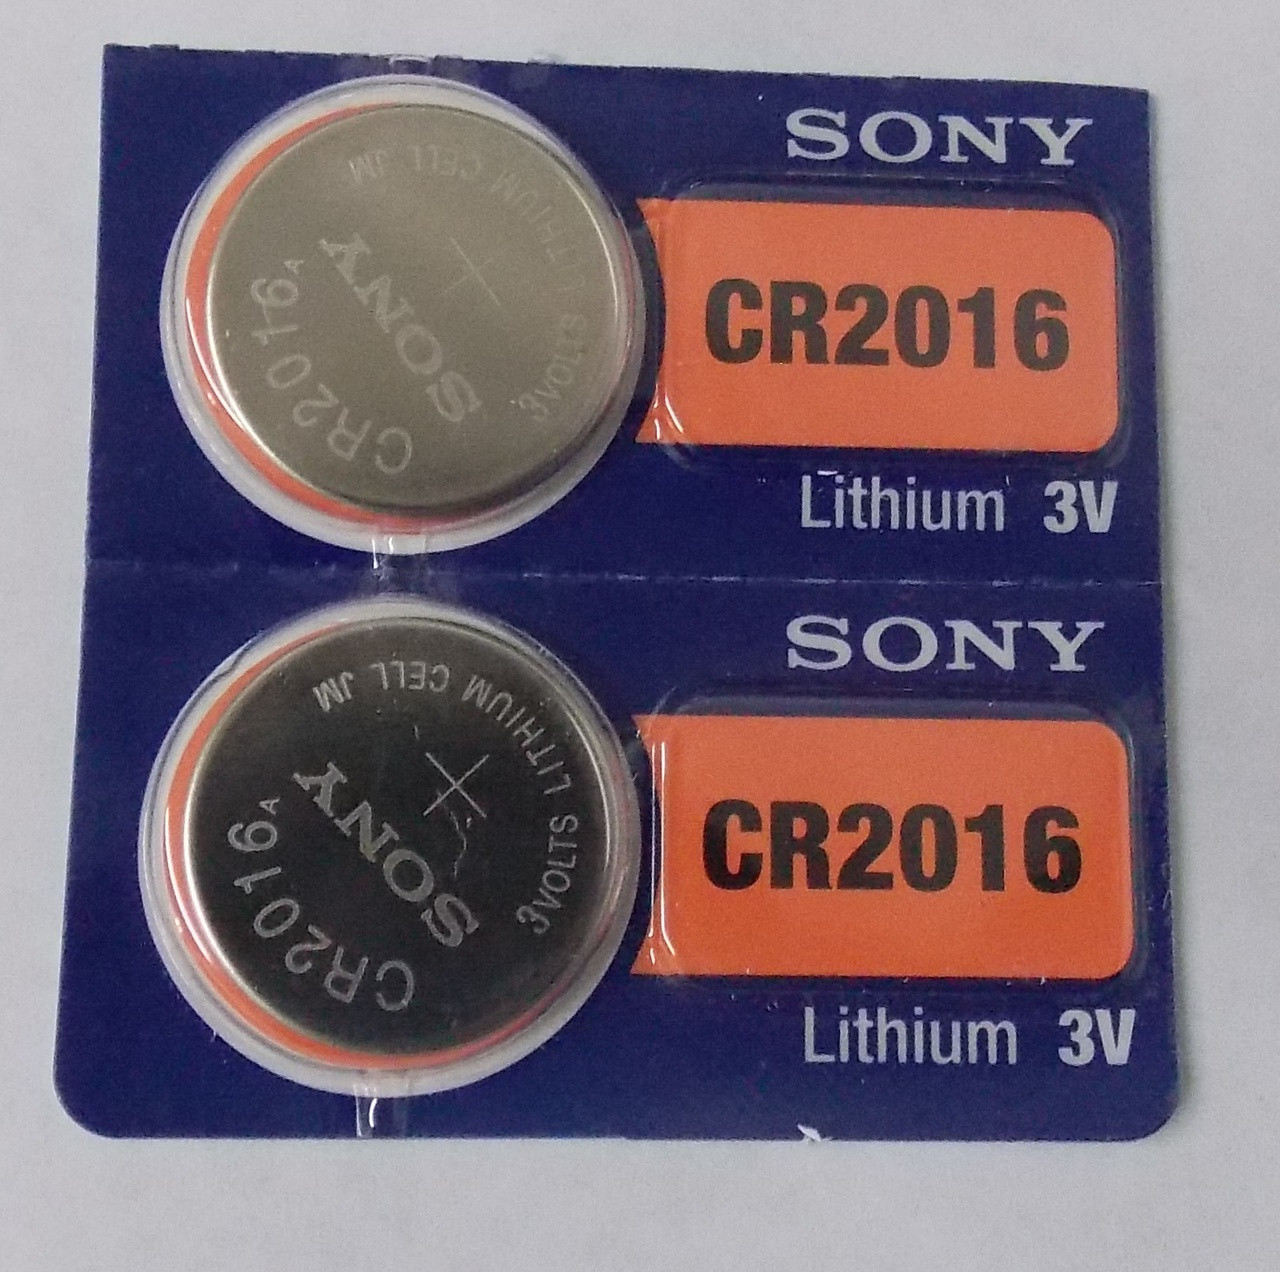 Murata CR1632 Battery 3V Lithium Coin Cell (10 Count) - Replaces Sony CR1632